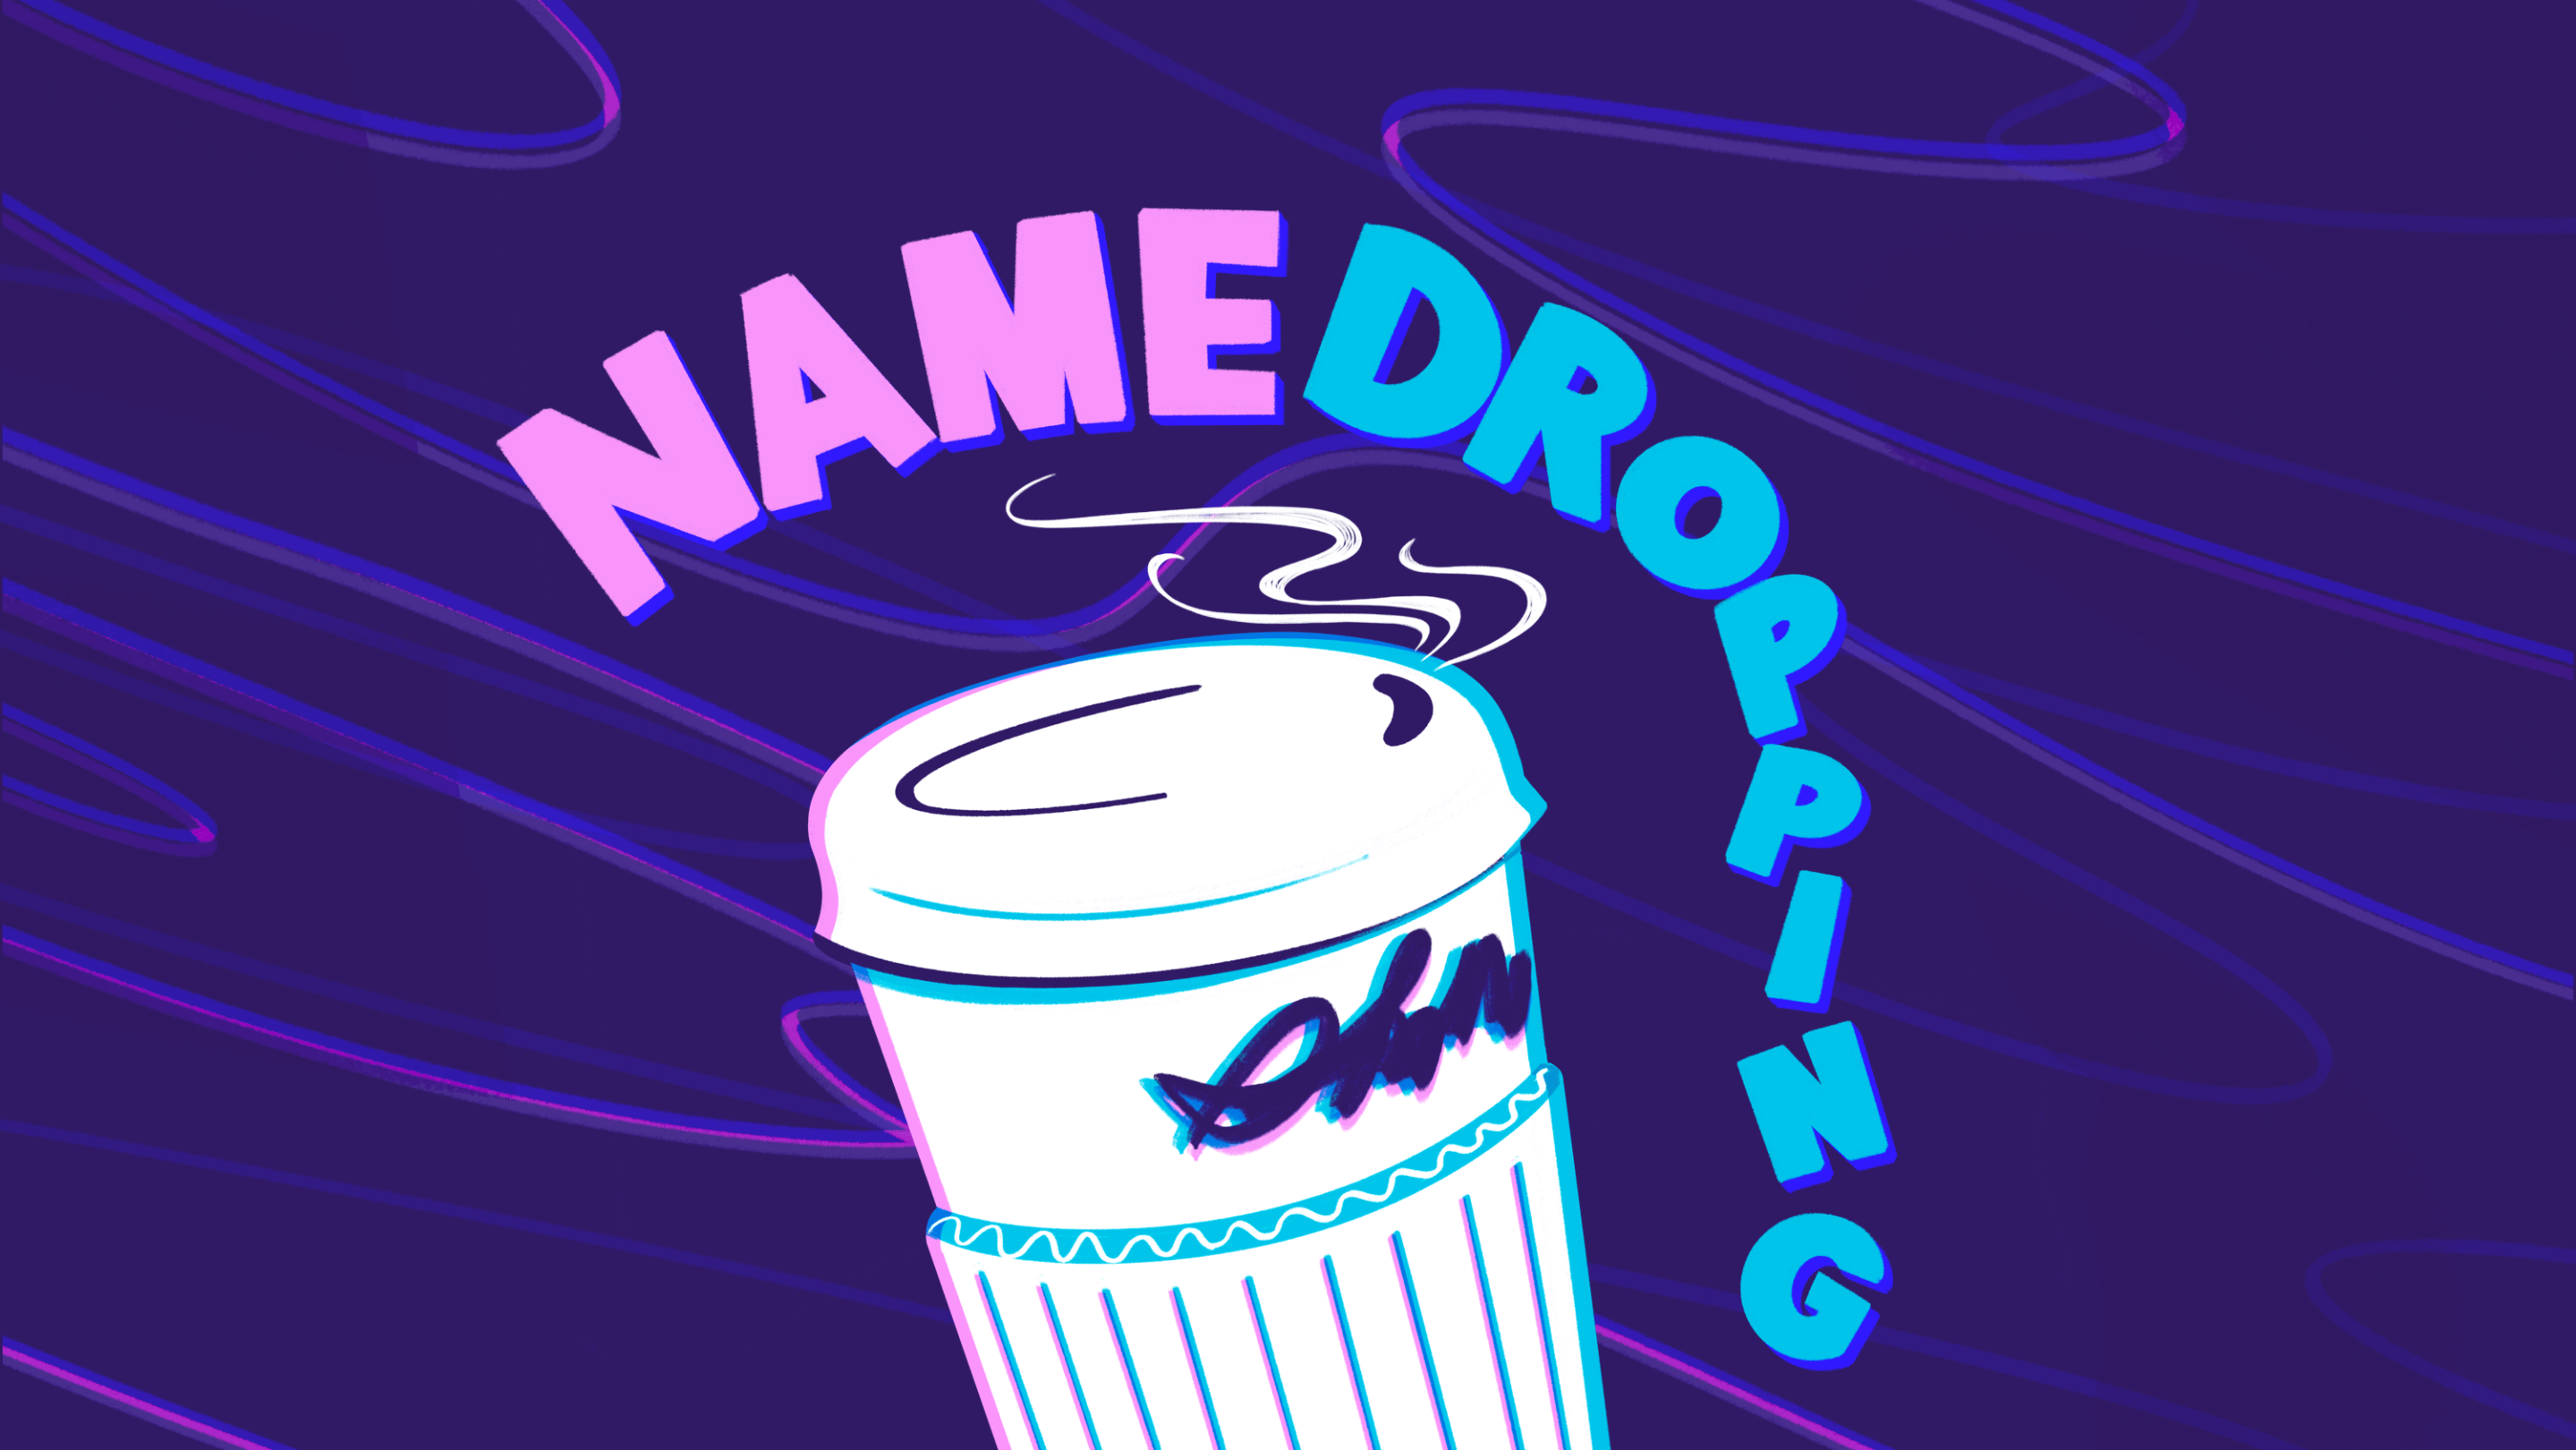 The Namedropping podcast logo, a coffee cup with a scratched-out name